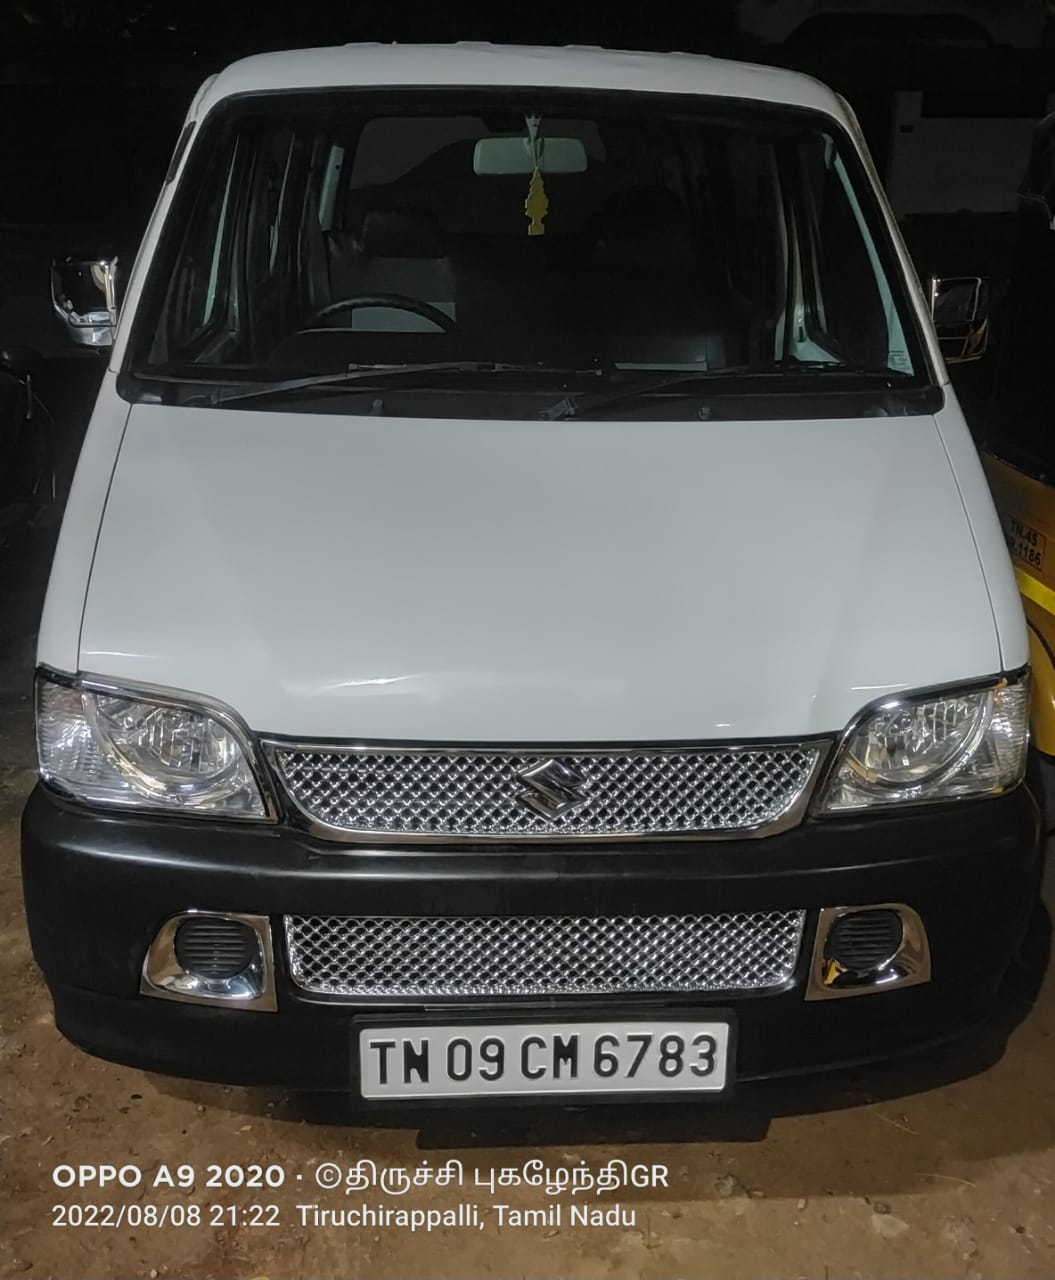 3820-for-sale-Maruthi-Suzuki-Eeco-Petrol-First-Owner-2018-TN-registered-rs-420000